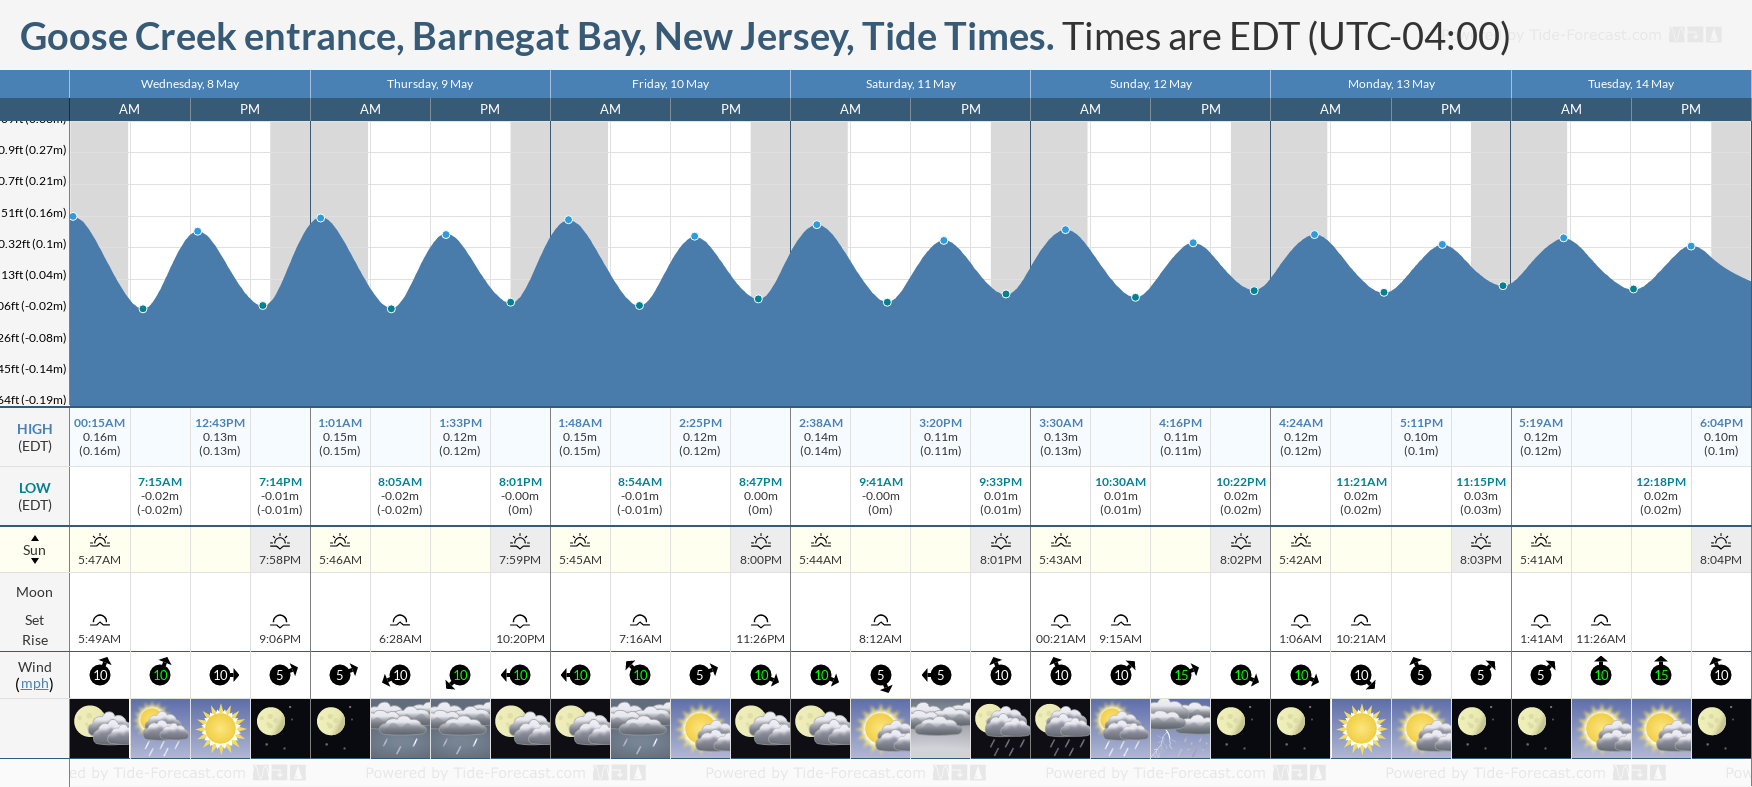 Goose Creek entrance, Barnegat Bay, New Jersey Tide Chart including high and low tide tide times for the next 7 days